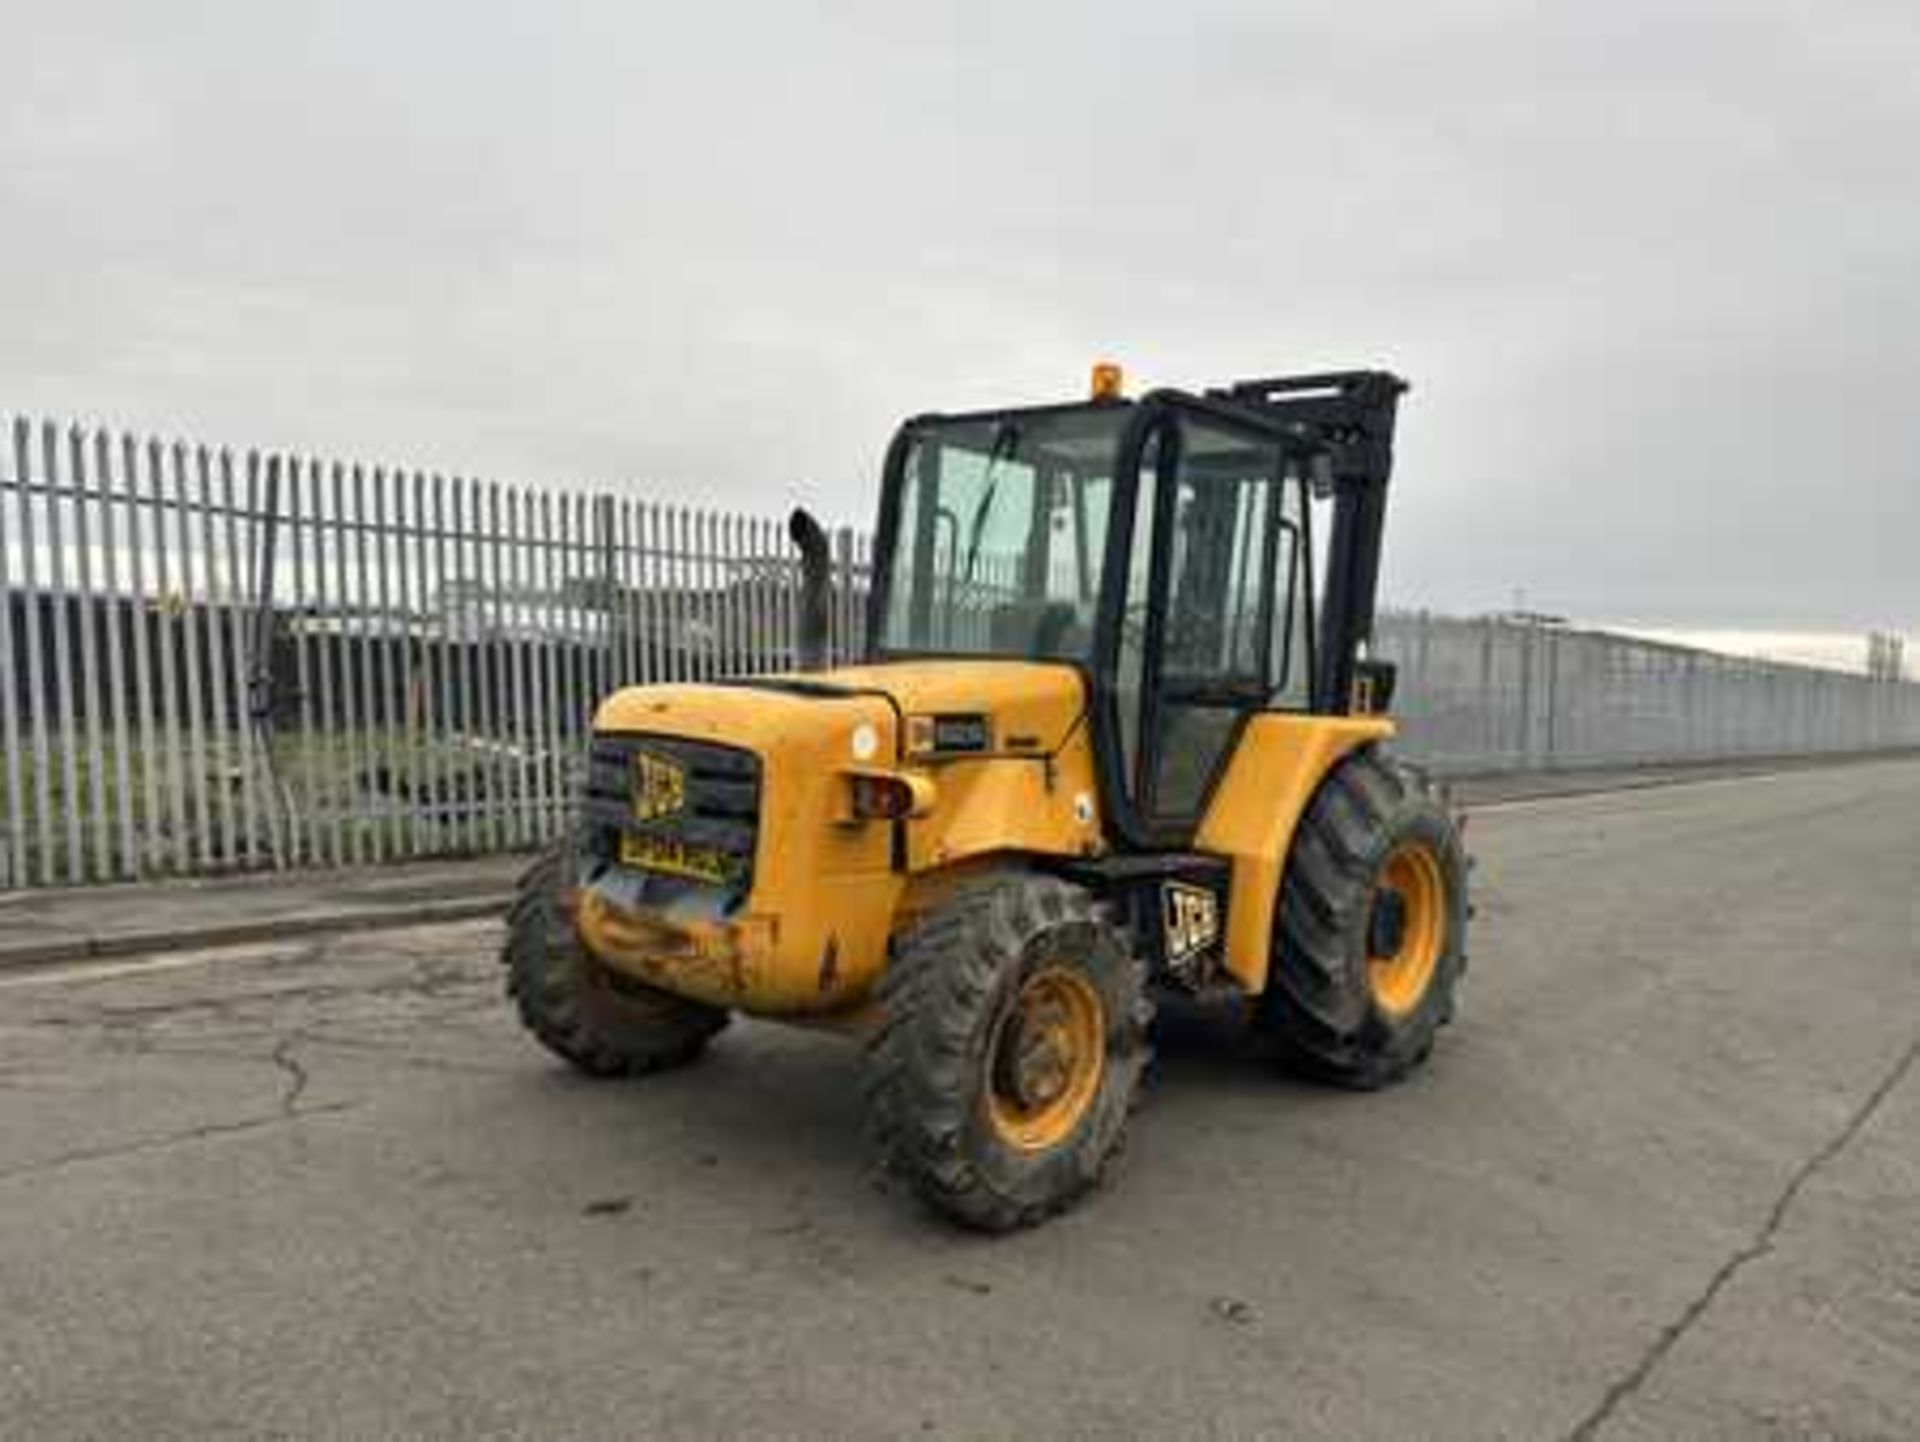 ROUGH TERRAIN FORKLIFTS JCB 926 4X4 - Image 5 of 6